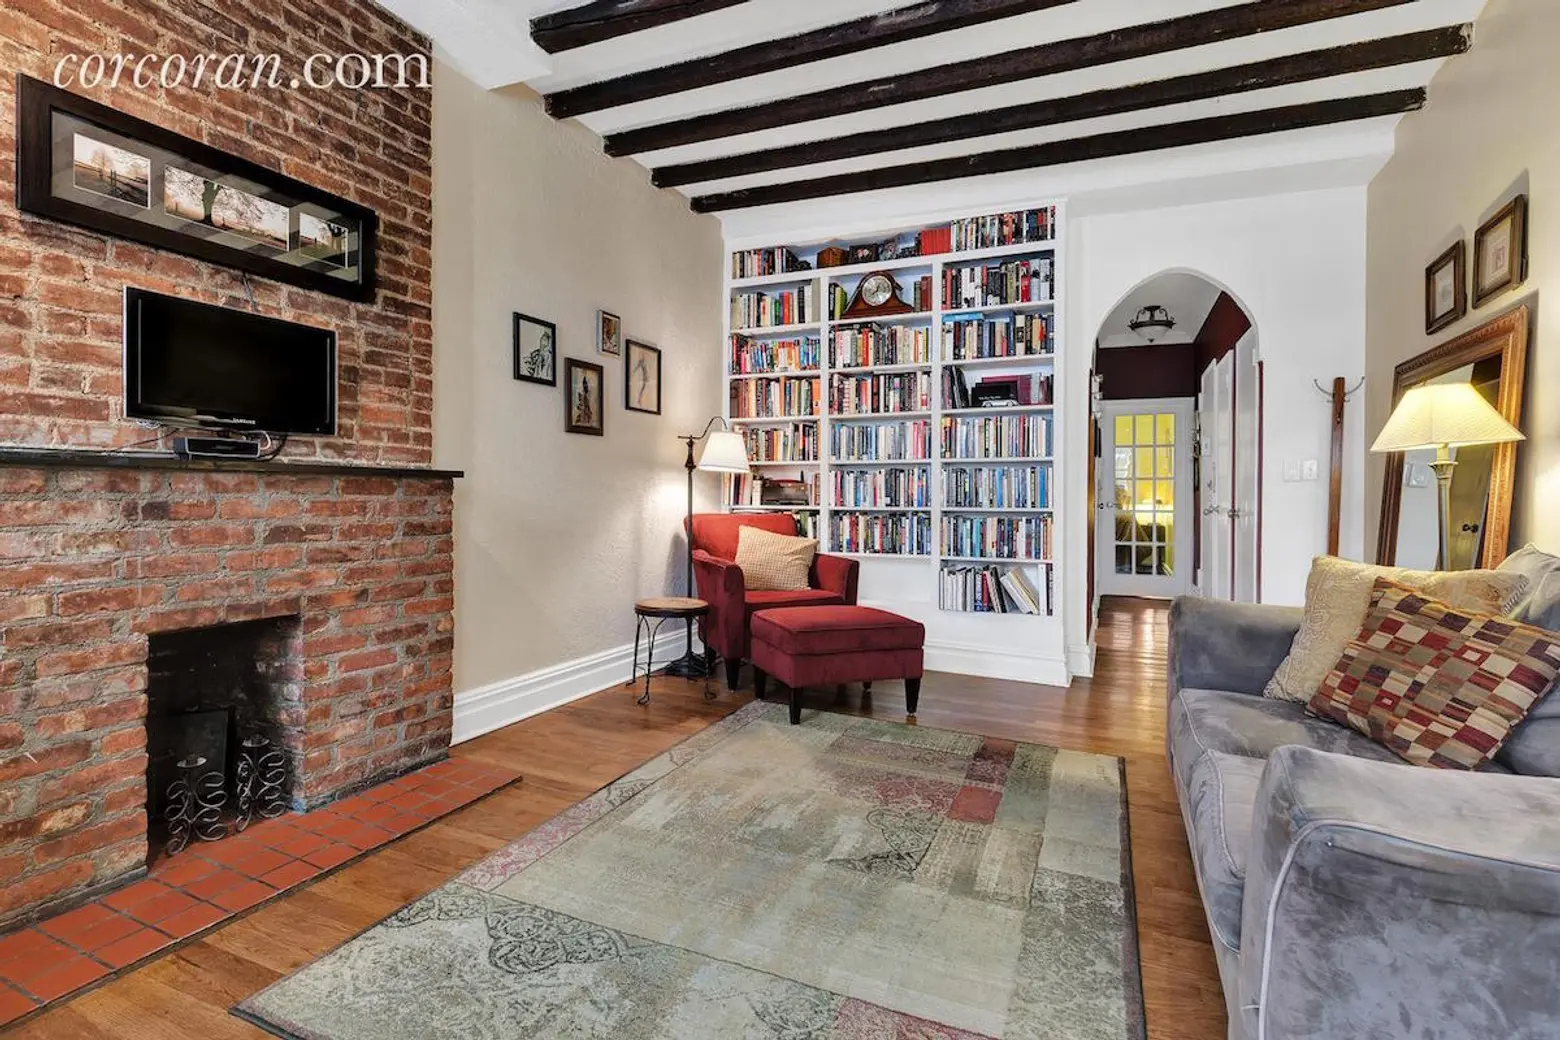 Live in a Charming Midtown Co-op Just Off Billionaires’ Row For $449K